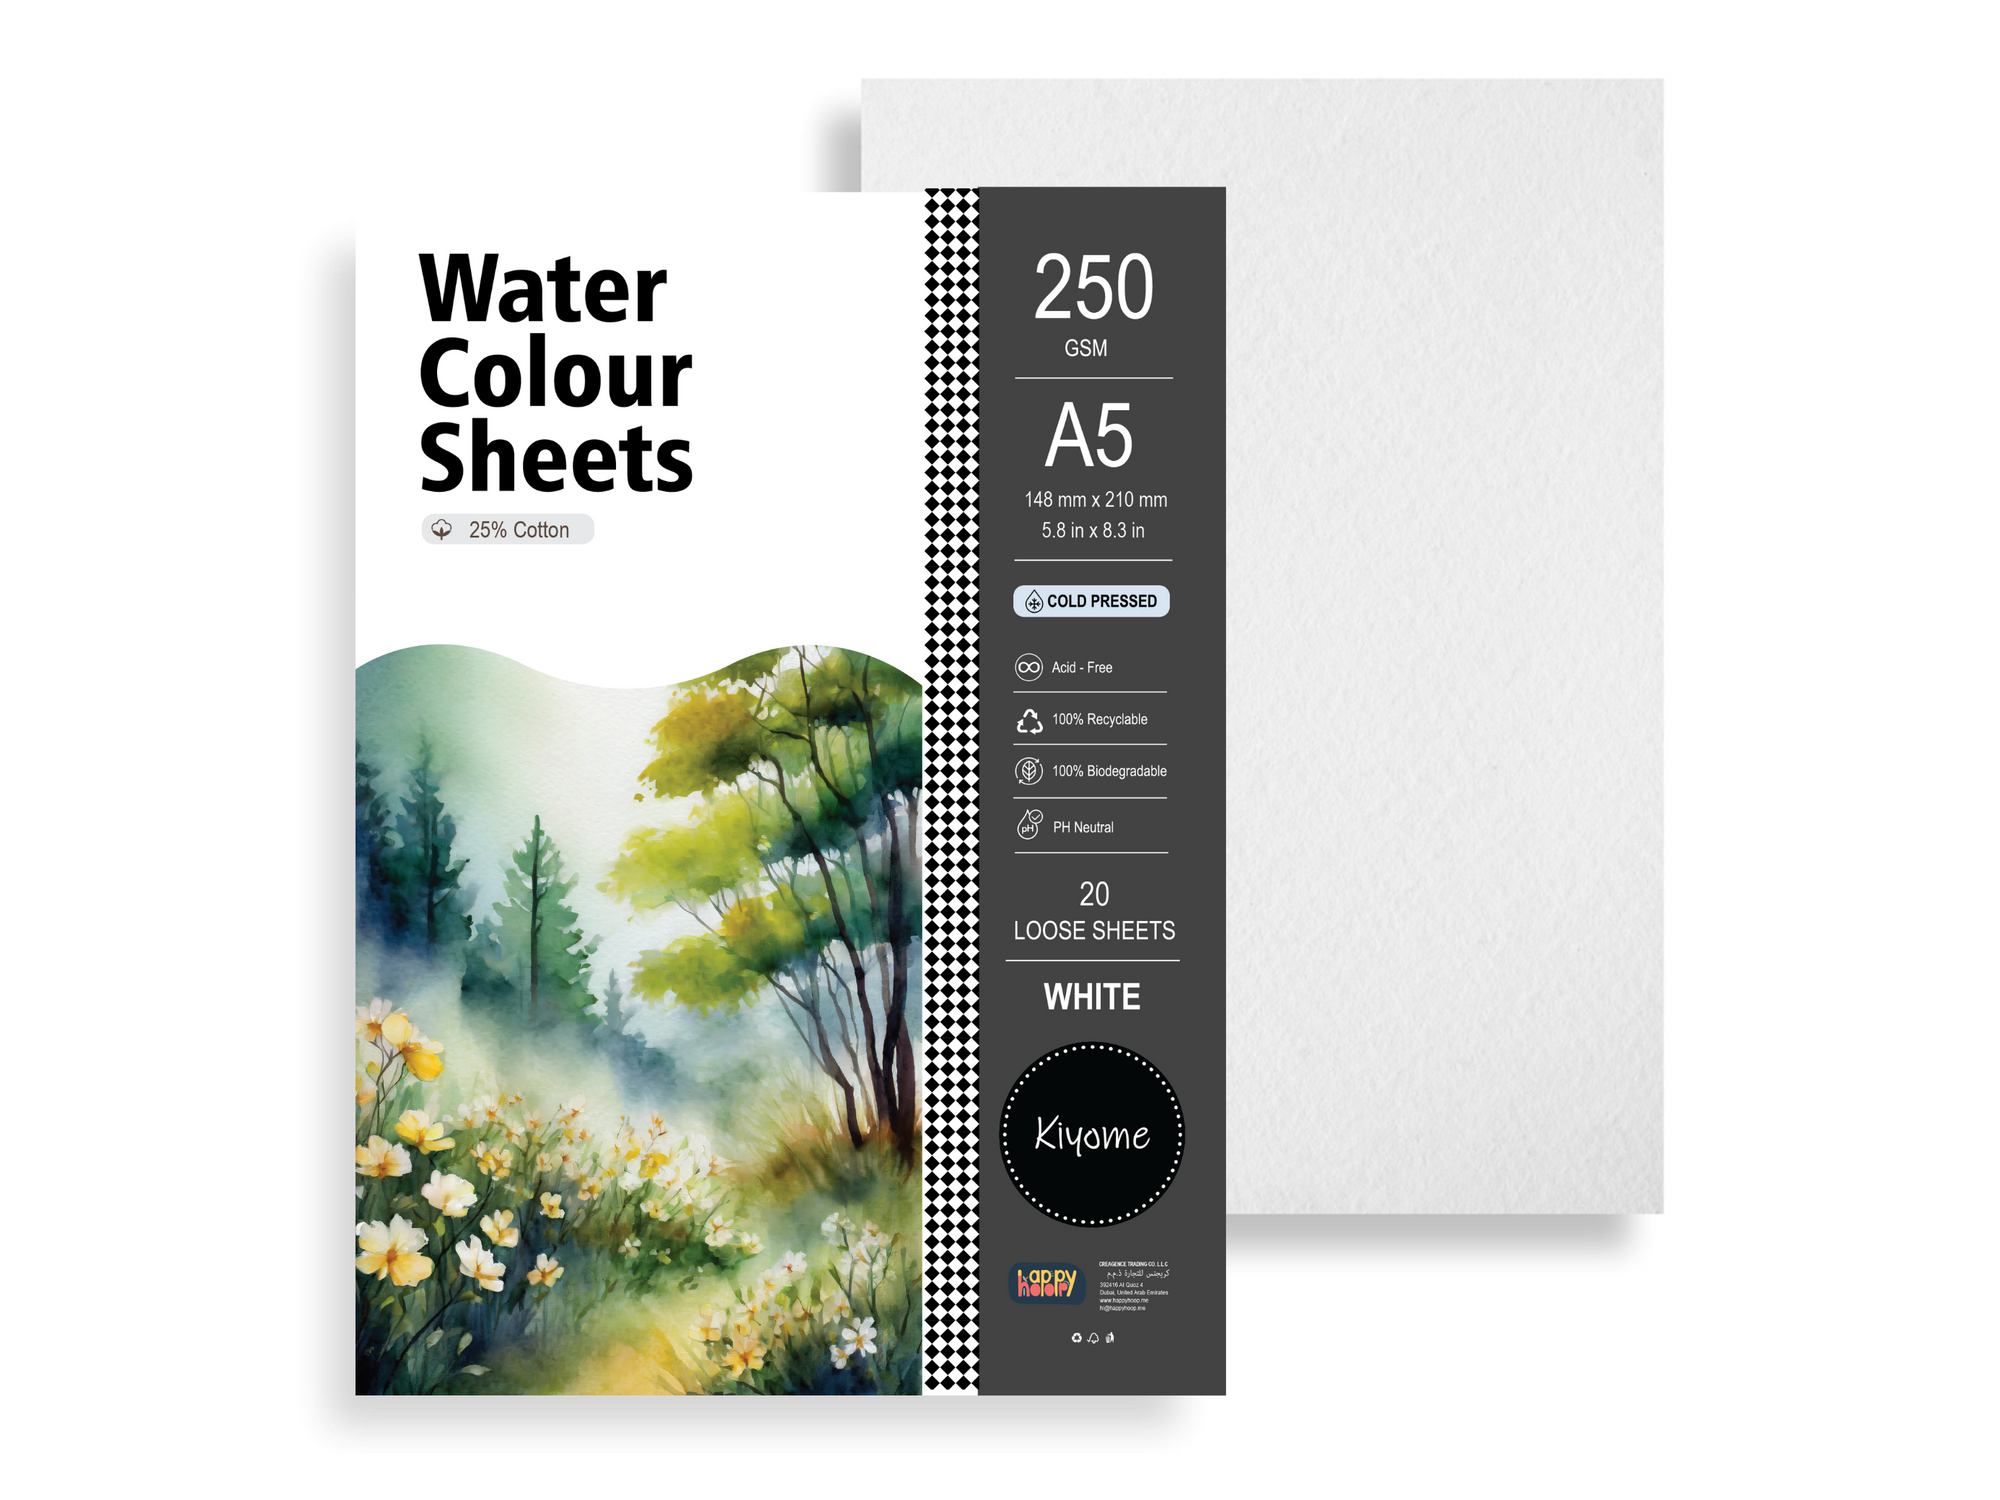 Kiyome 25% Cotton Watercolour Sheets | Cold Pressed | 250 GSM | A5 | 20 Sheets